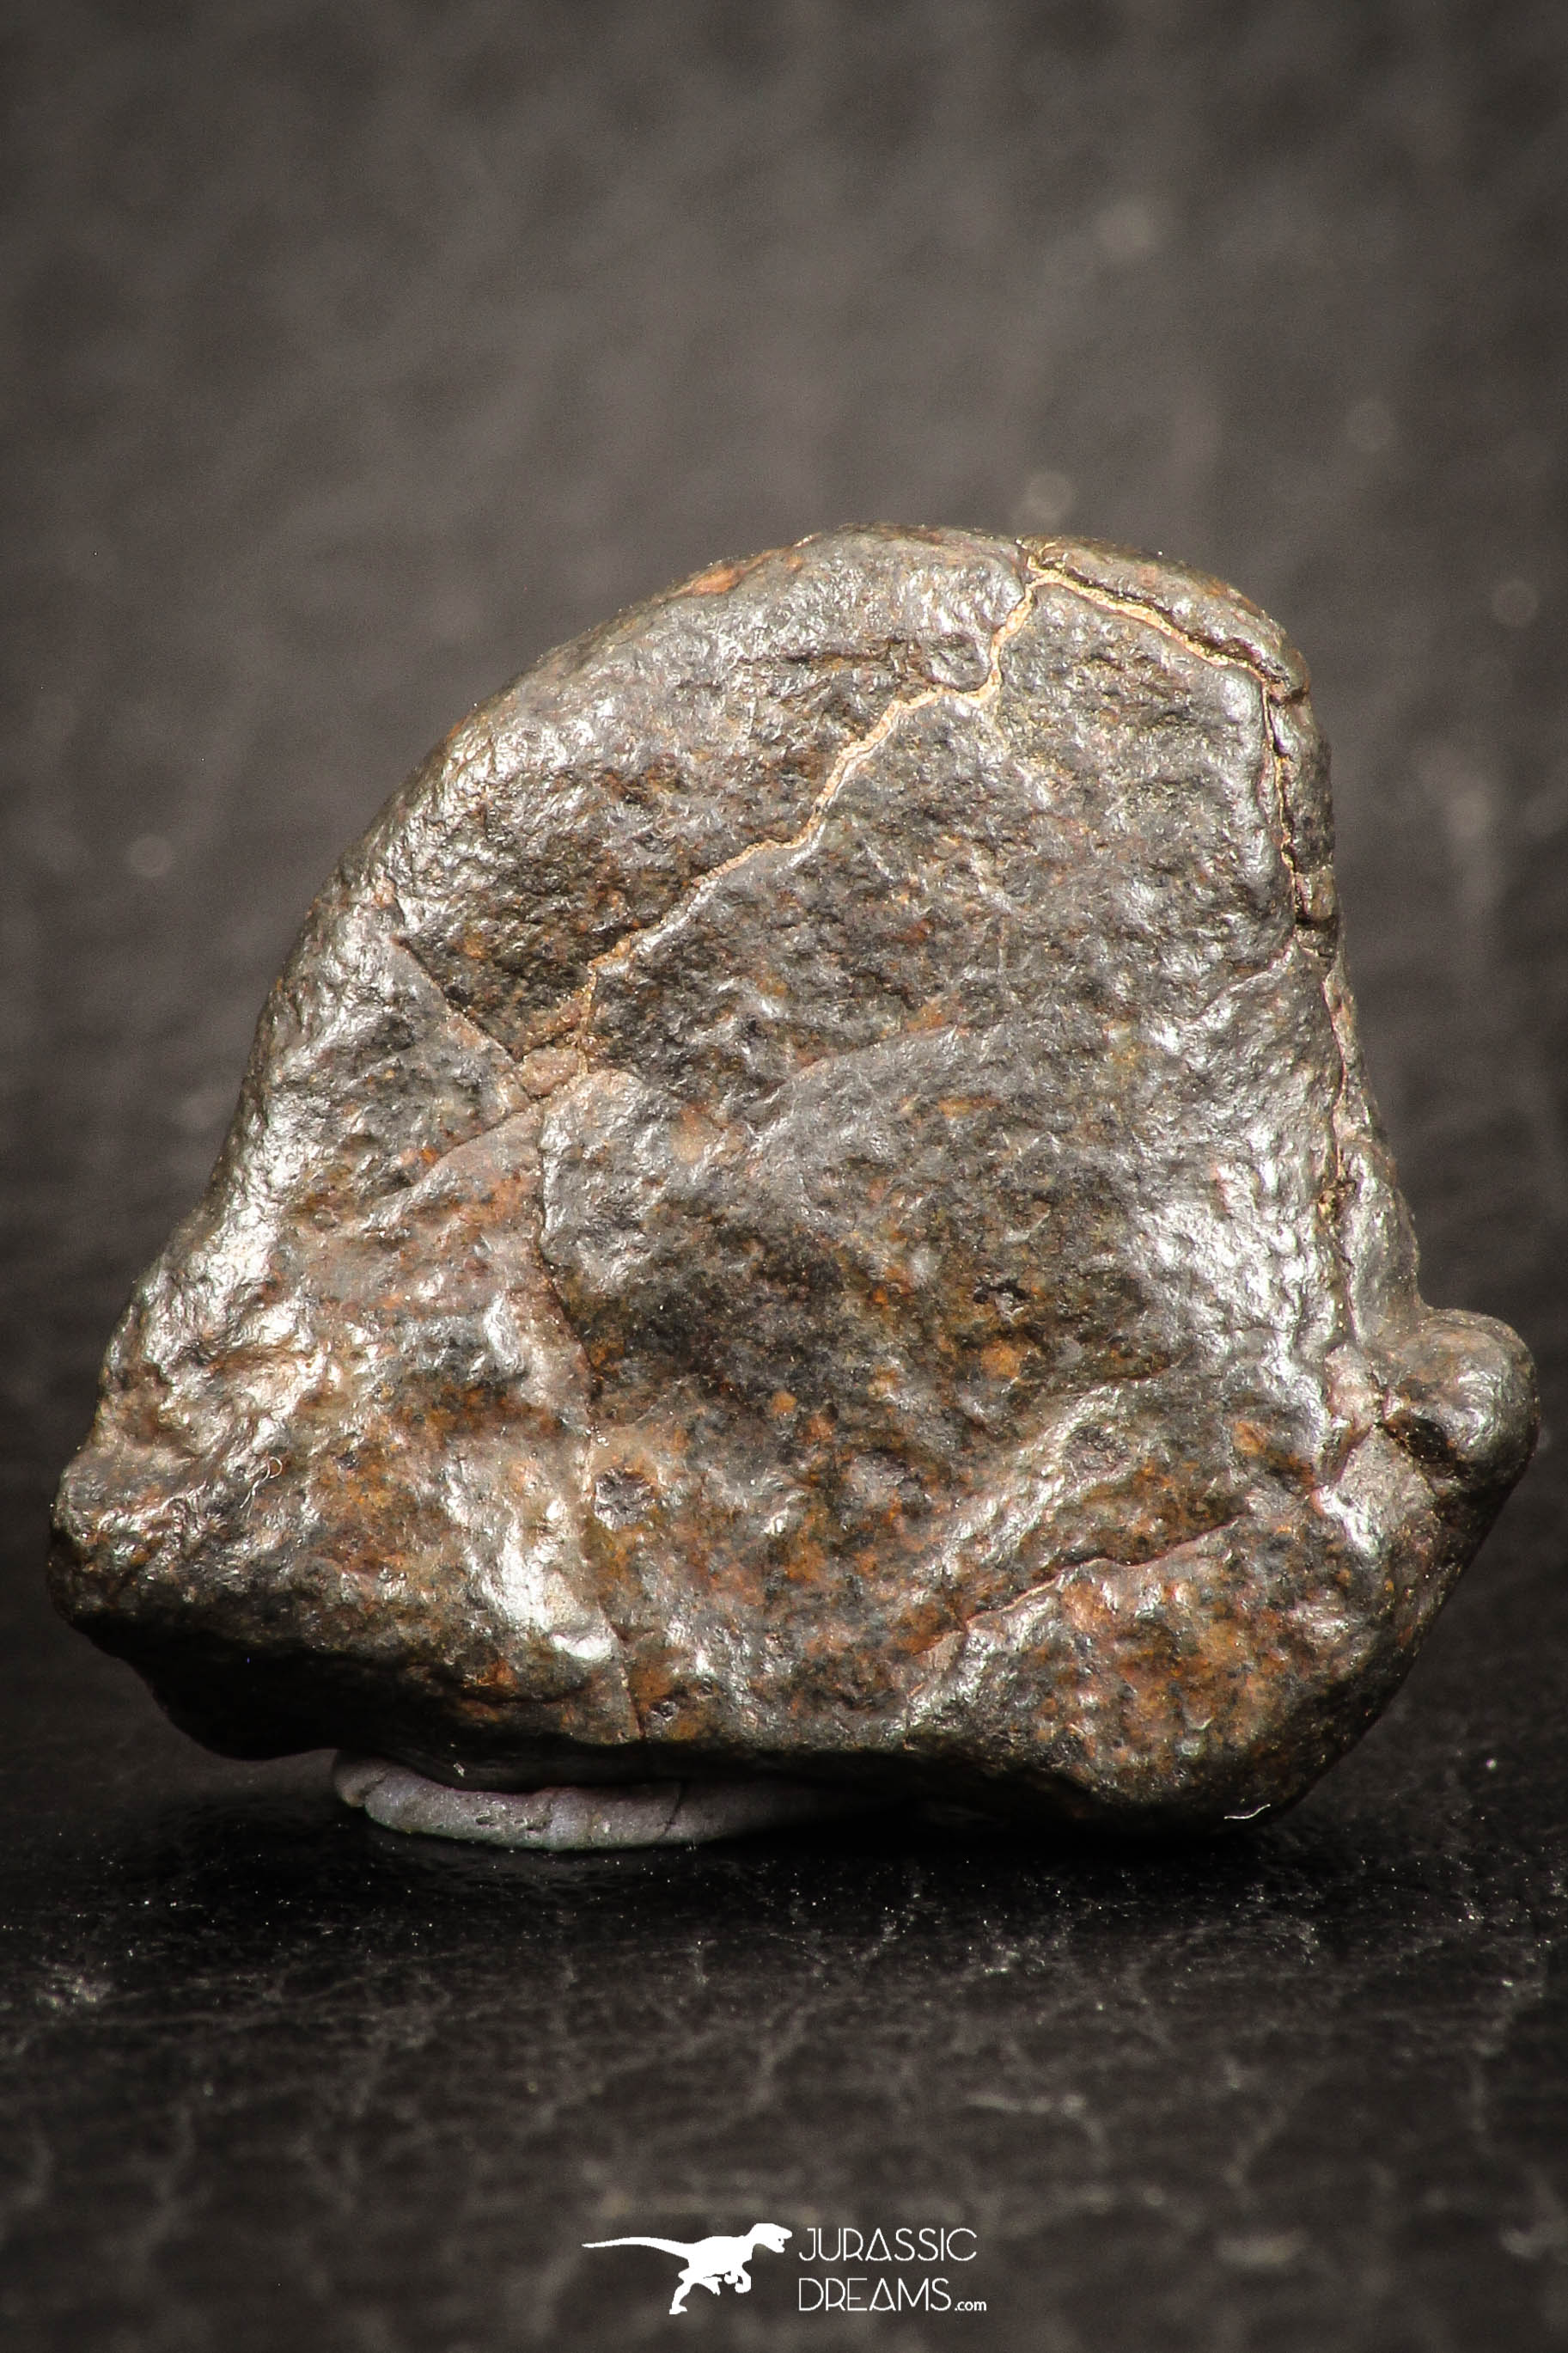 Partial NWA L-H Type Unclassified Ordinary Chondrite Meteorite 8.0 